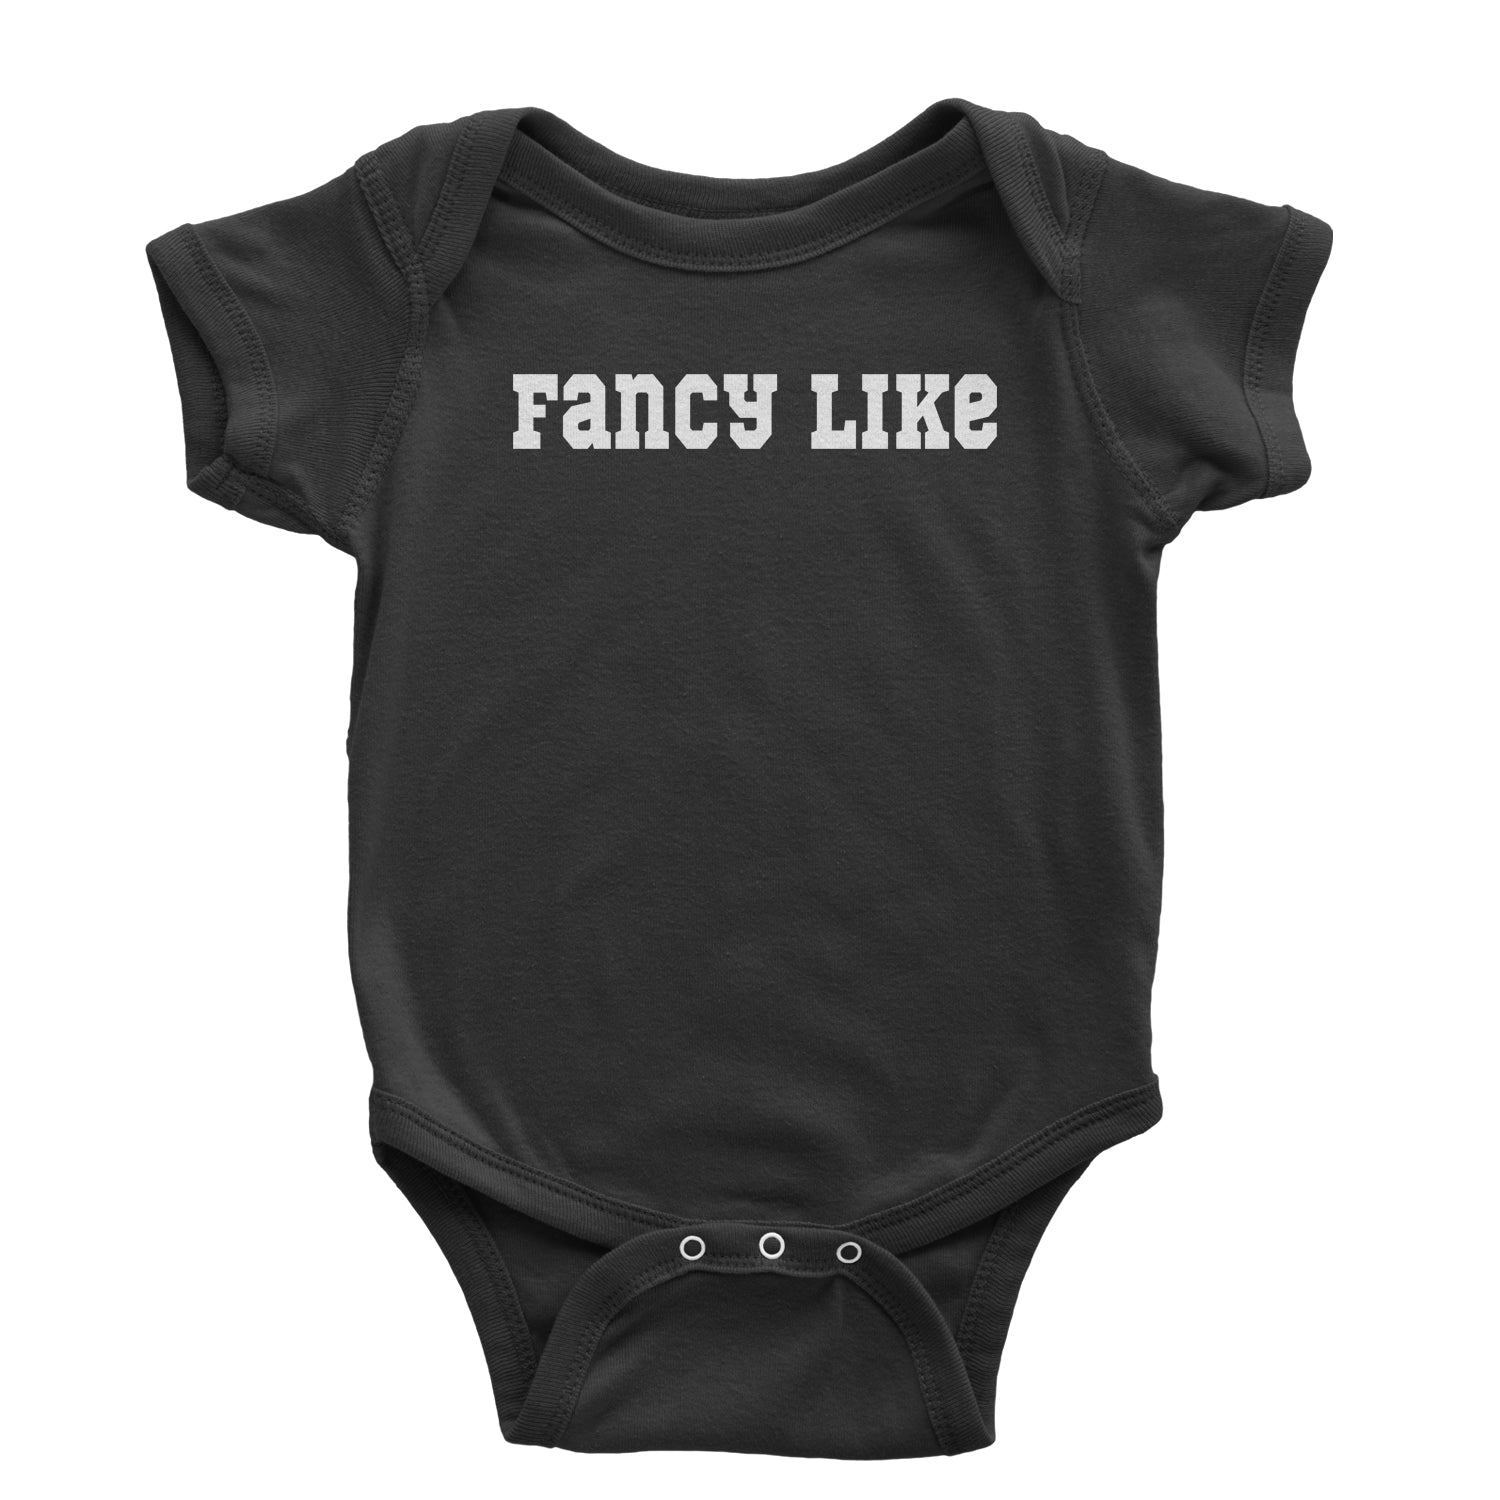 Fancy Like Infant One-Piece Romper Bodysuit hayes, walter by Expression Tees